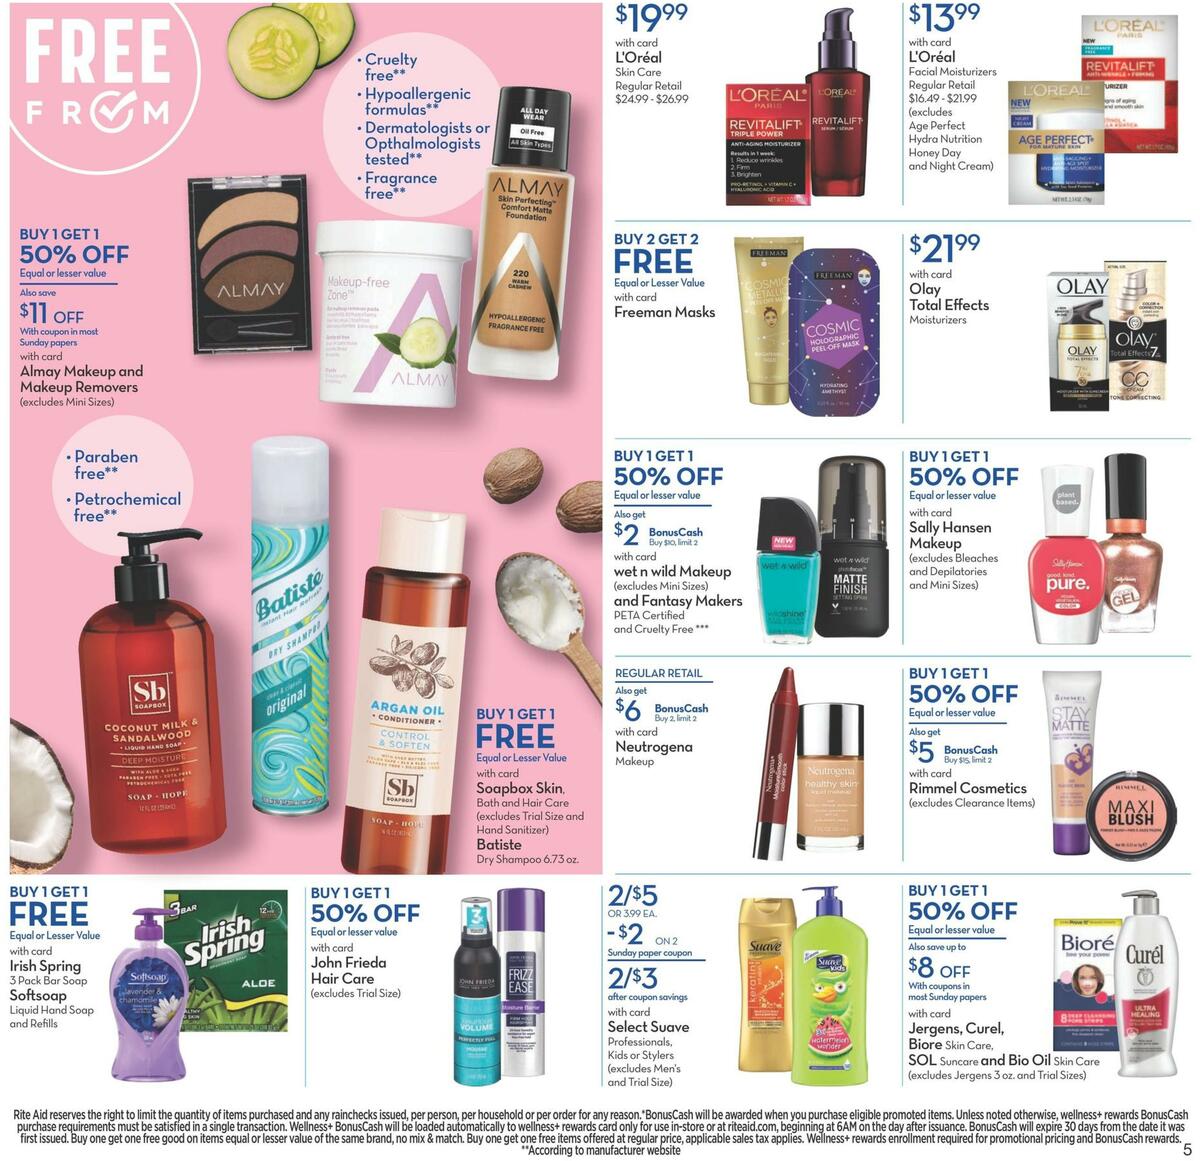 Rite Aid Weekly Ad from October 4